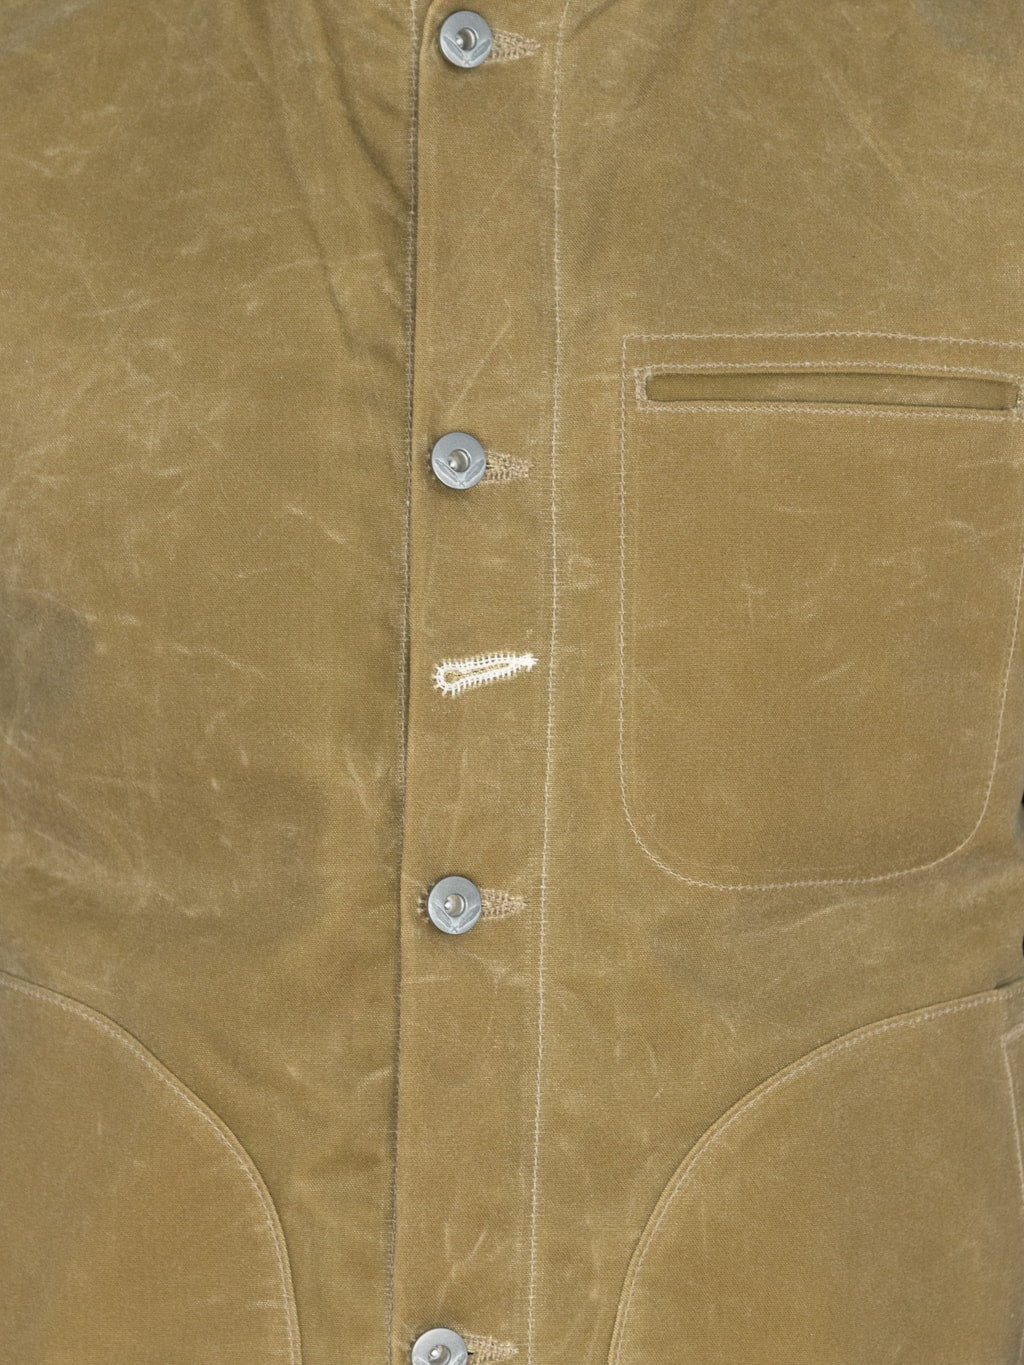 rogue territory lined waxed canvas supply vest 10oz tan chest details